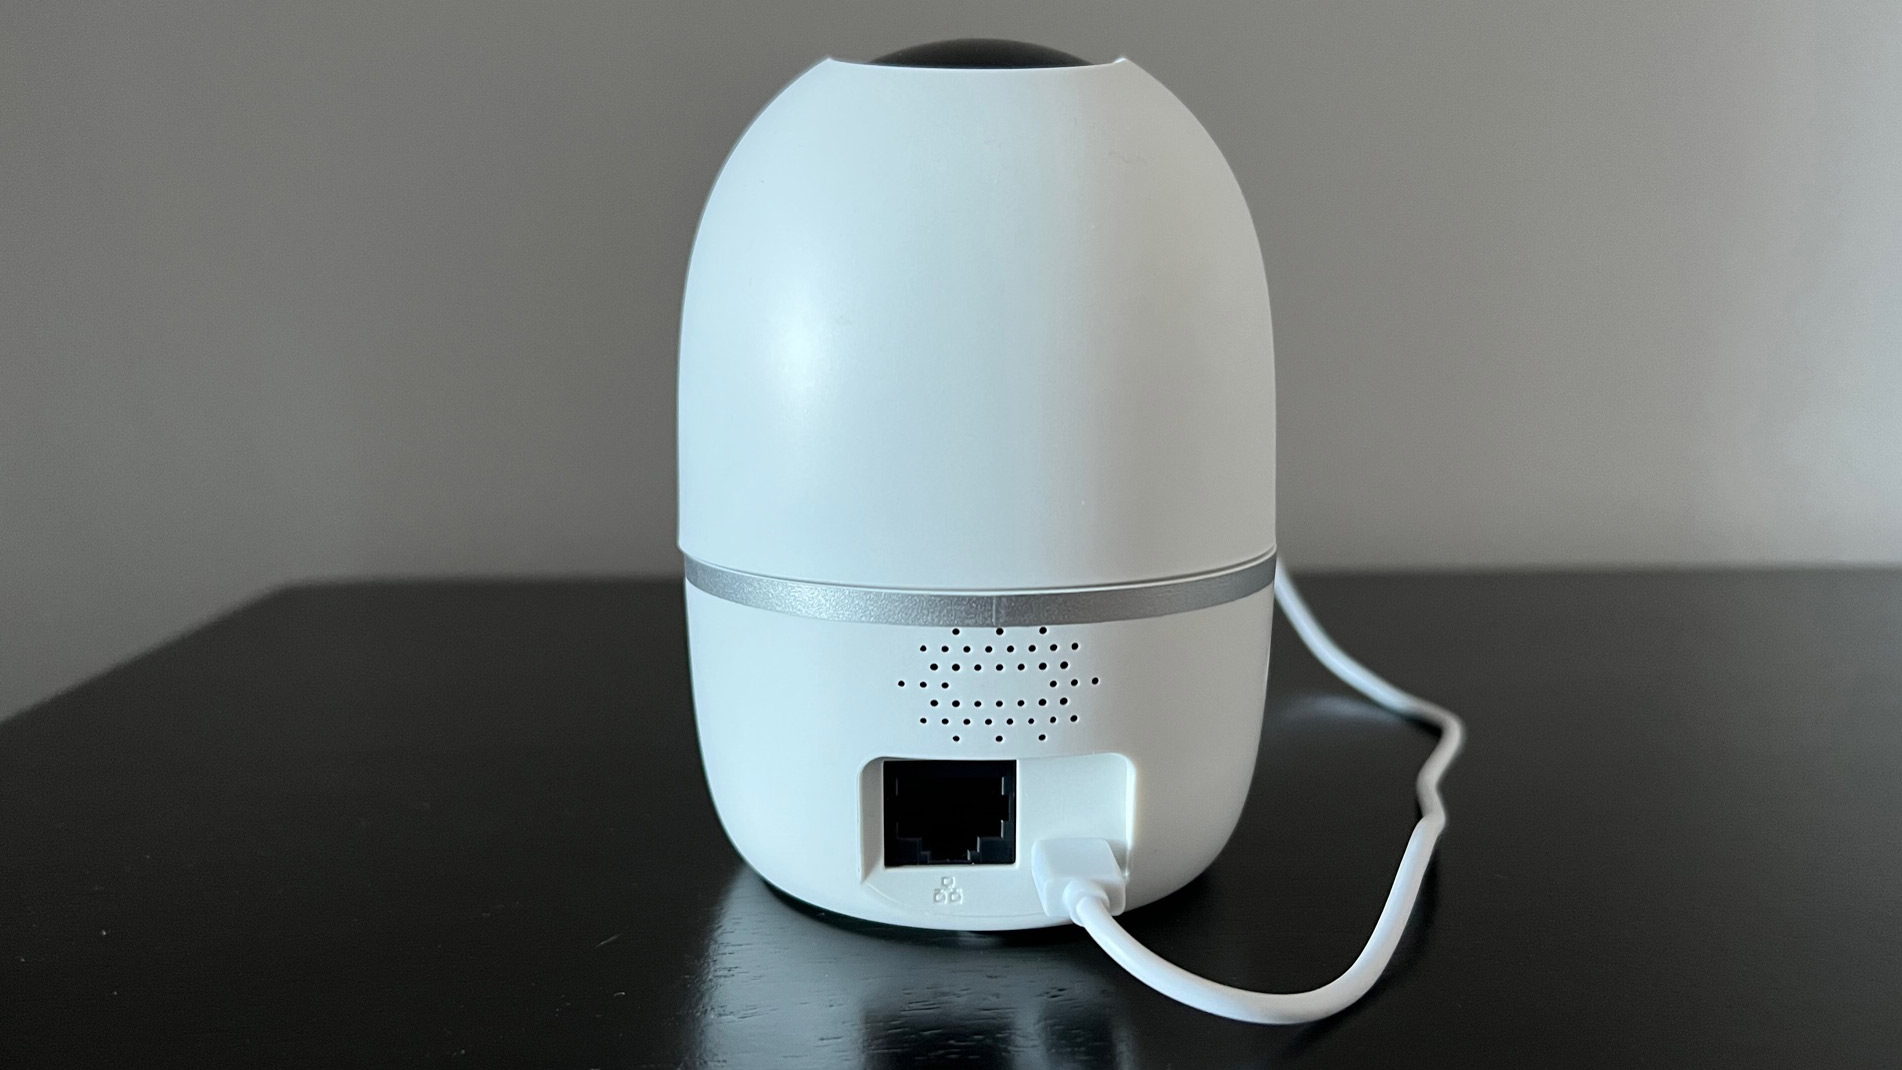 The back view of the Imou A1 home security camera